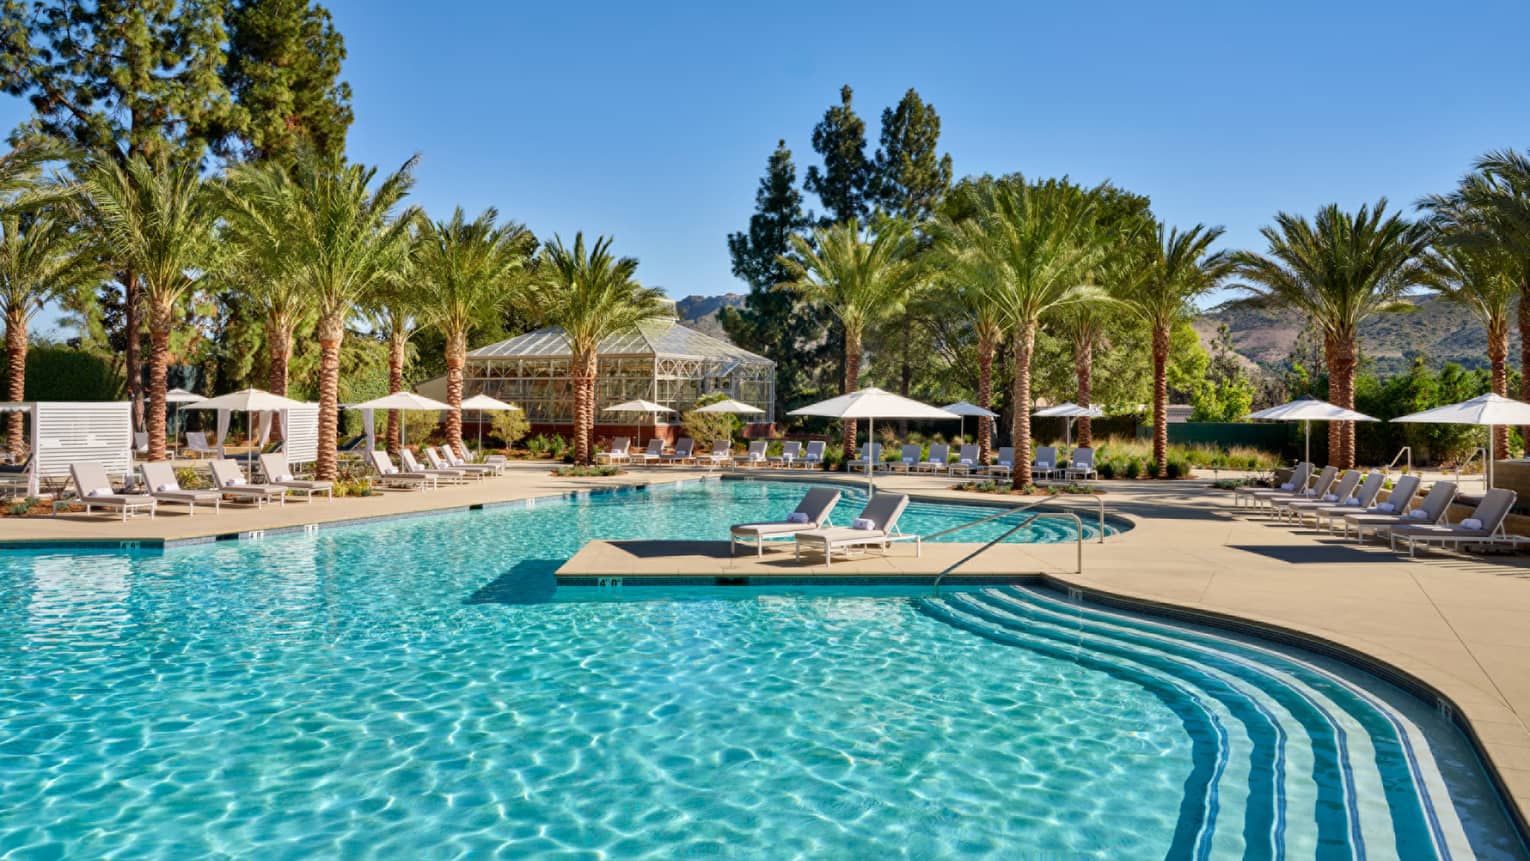 An outdoor pool surrounded by palm trees.